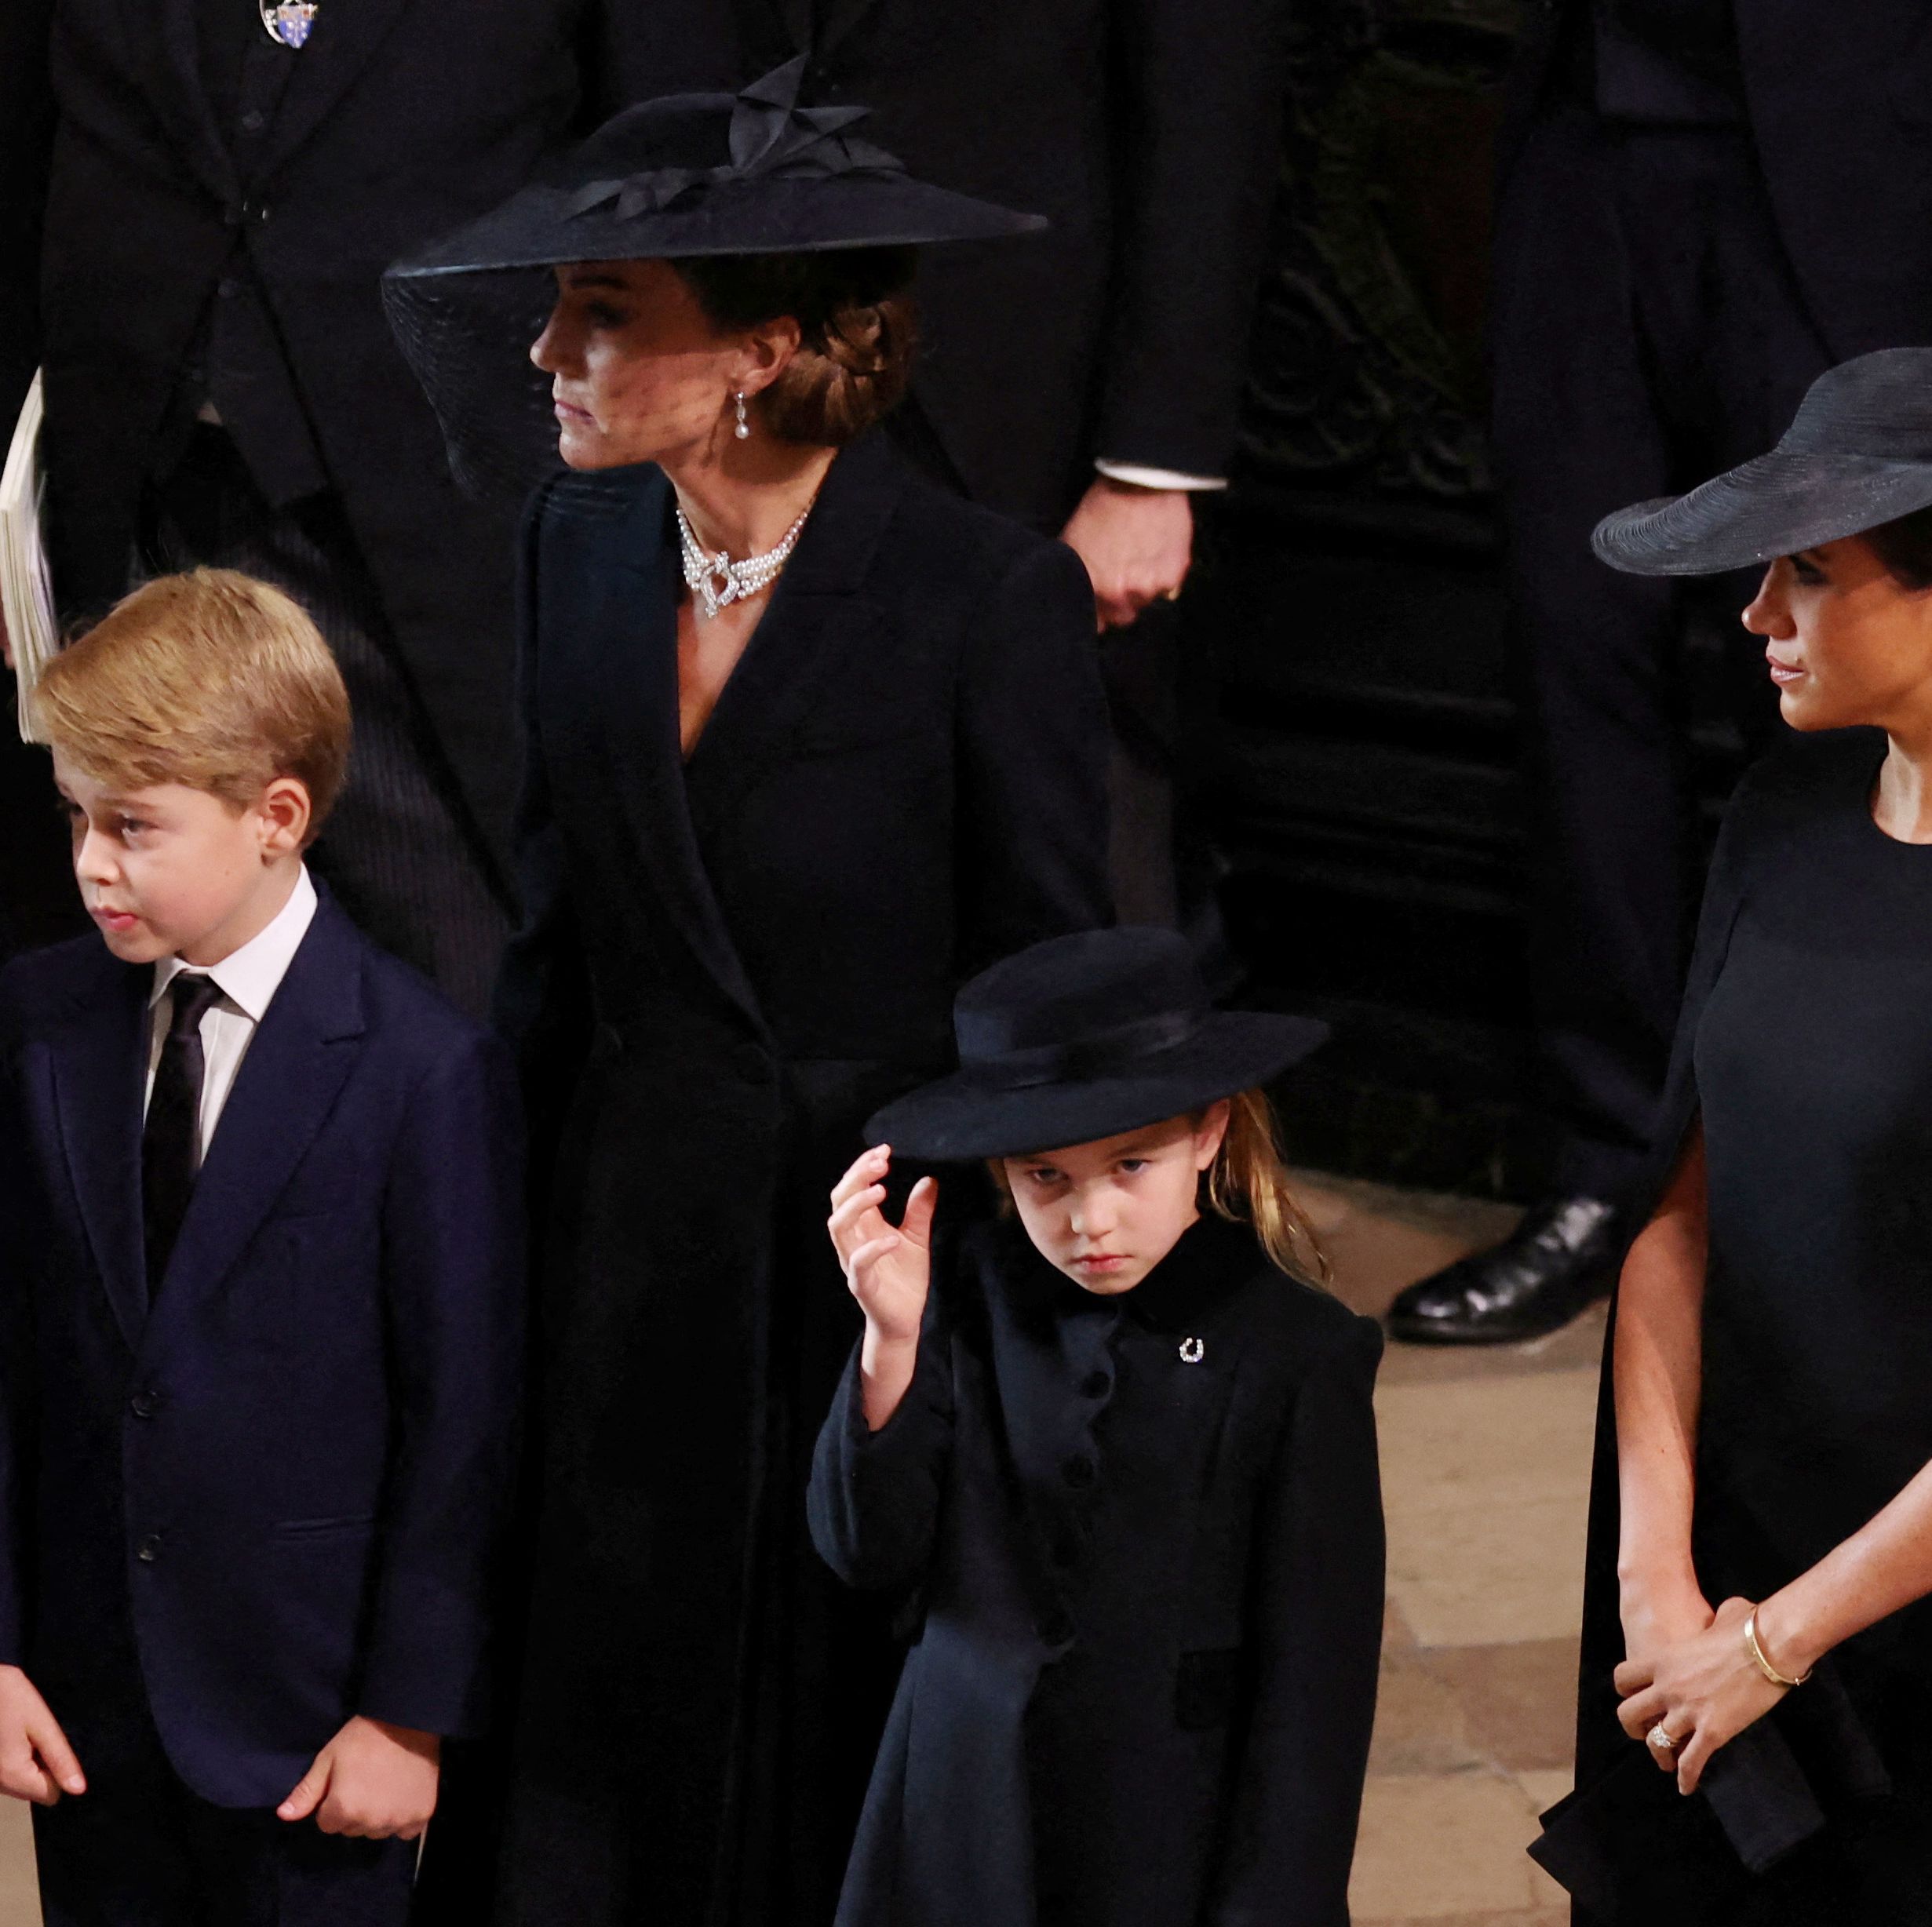 The Duchess of Sussex put on a united front with the royal family.